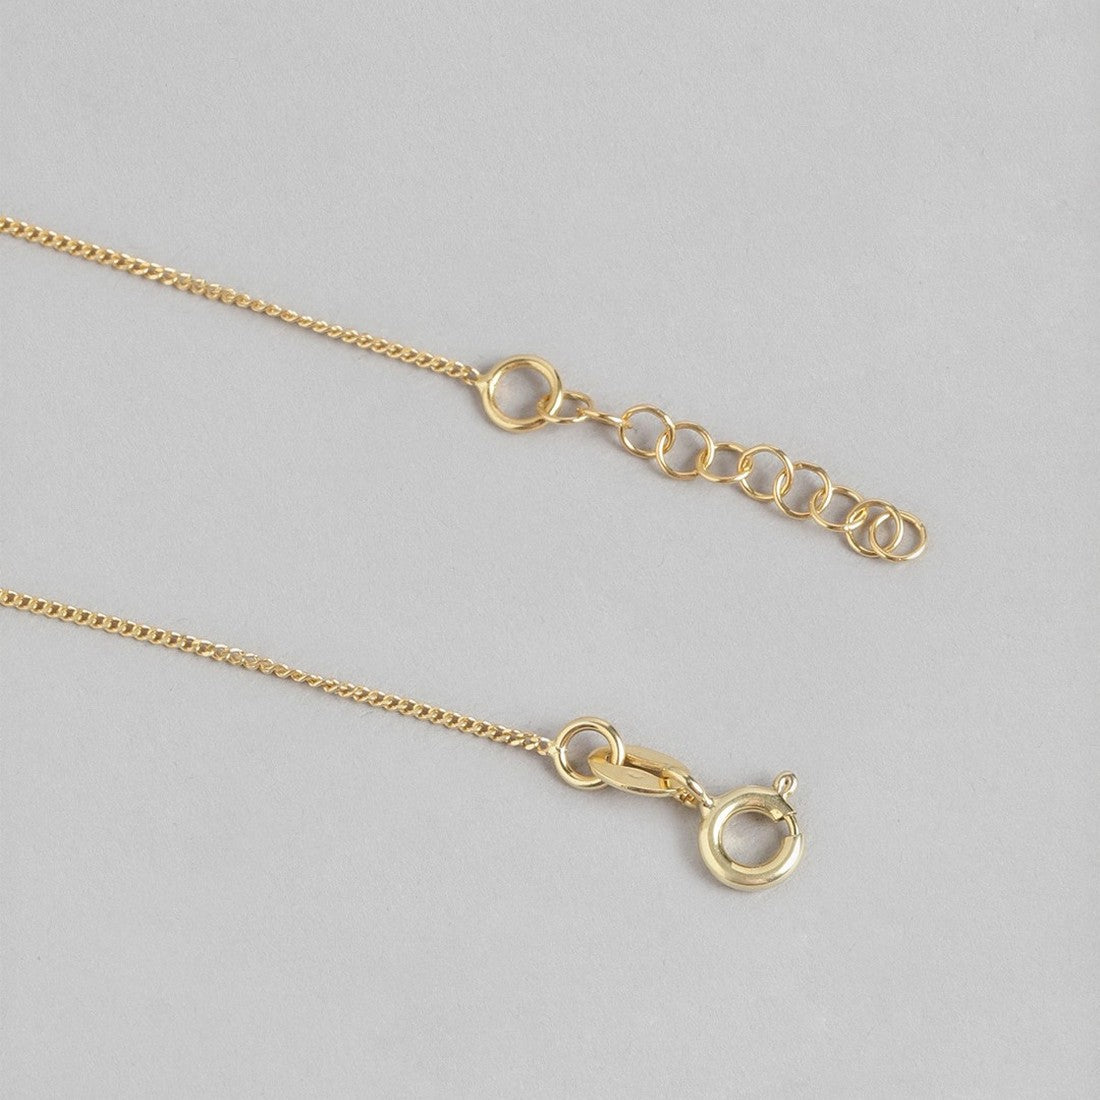 Gold-Plated & Pearl 925 Sterling Silver Chained Anklet